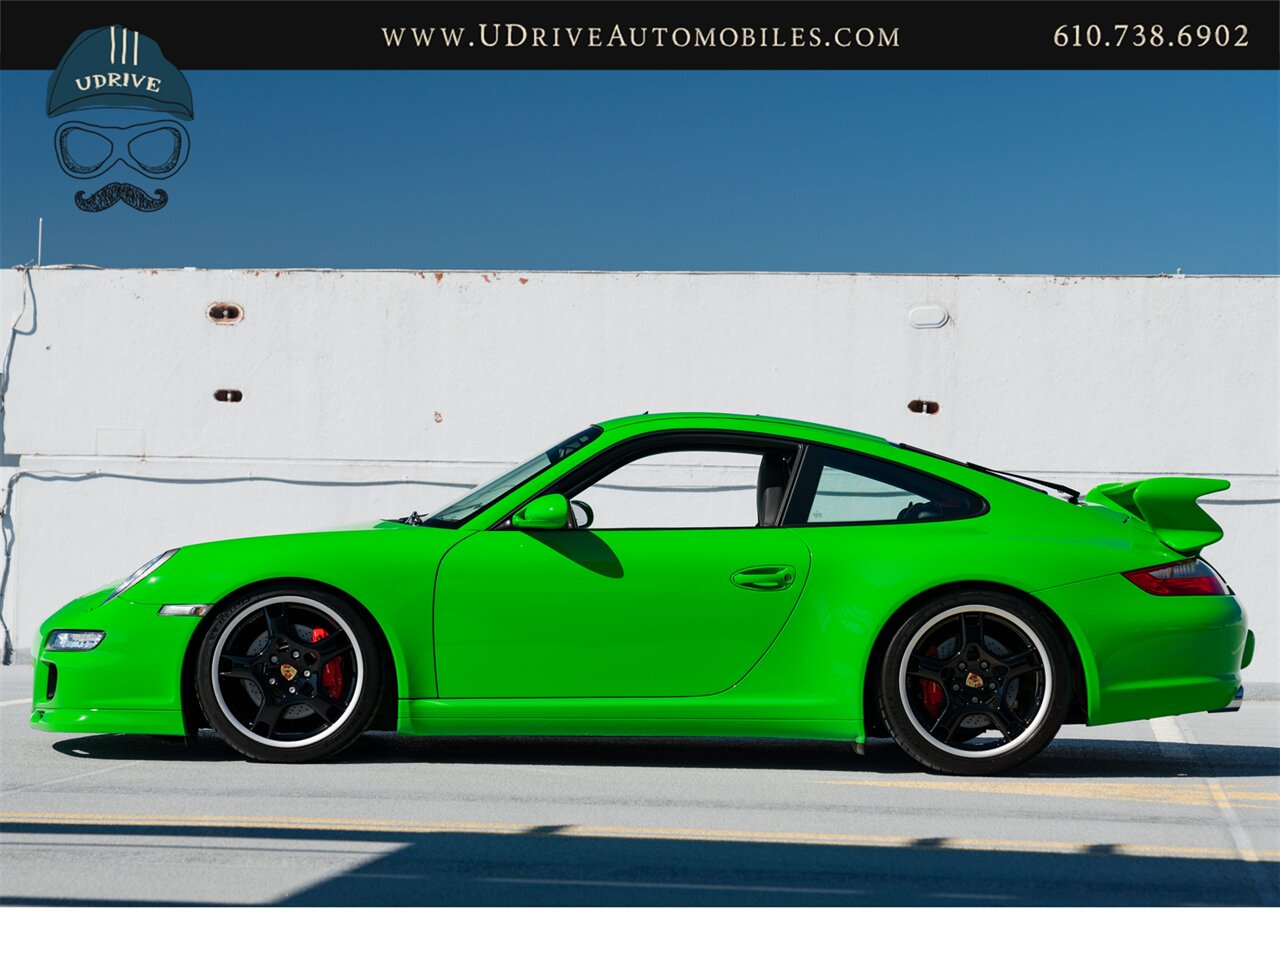 2006 Porsche 911 Carrera 4S  997 PTS Signal Green 6Sp Sport Sts Spt Chrono Spt Exhst - Photo 10 - West Chester, PA 19382